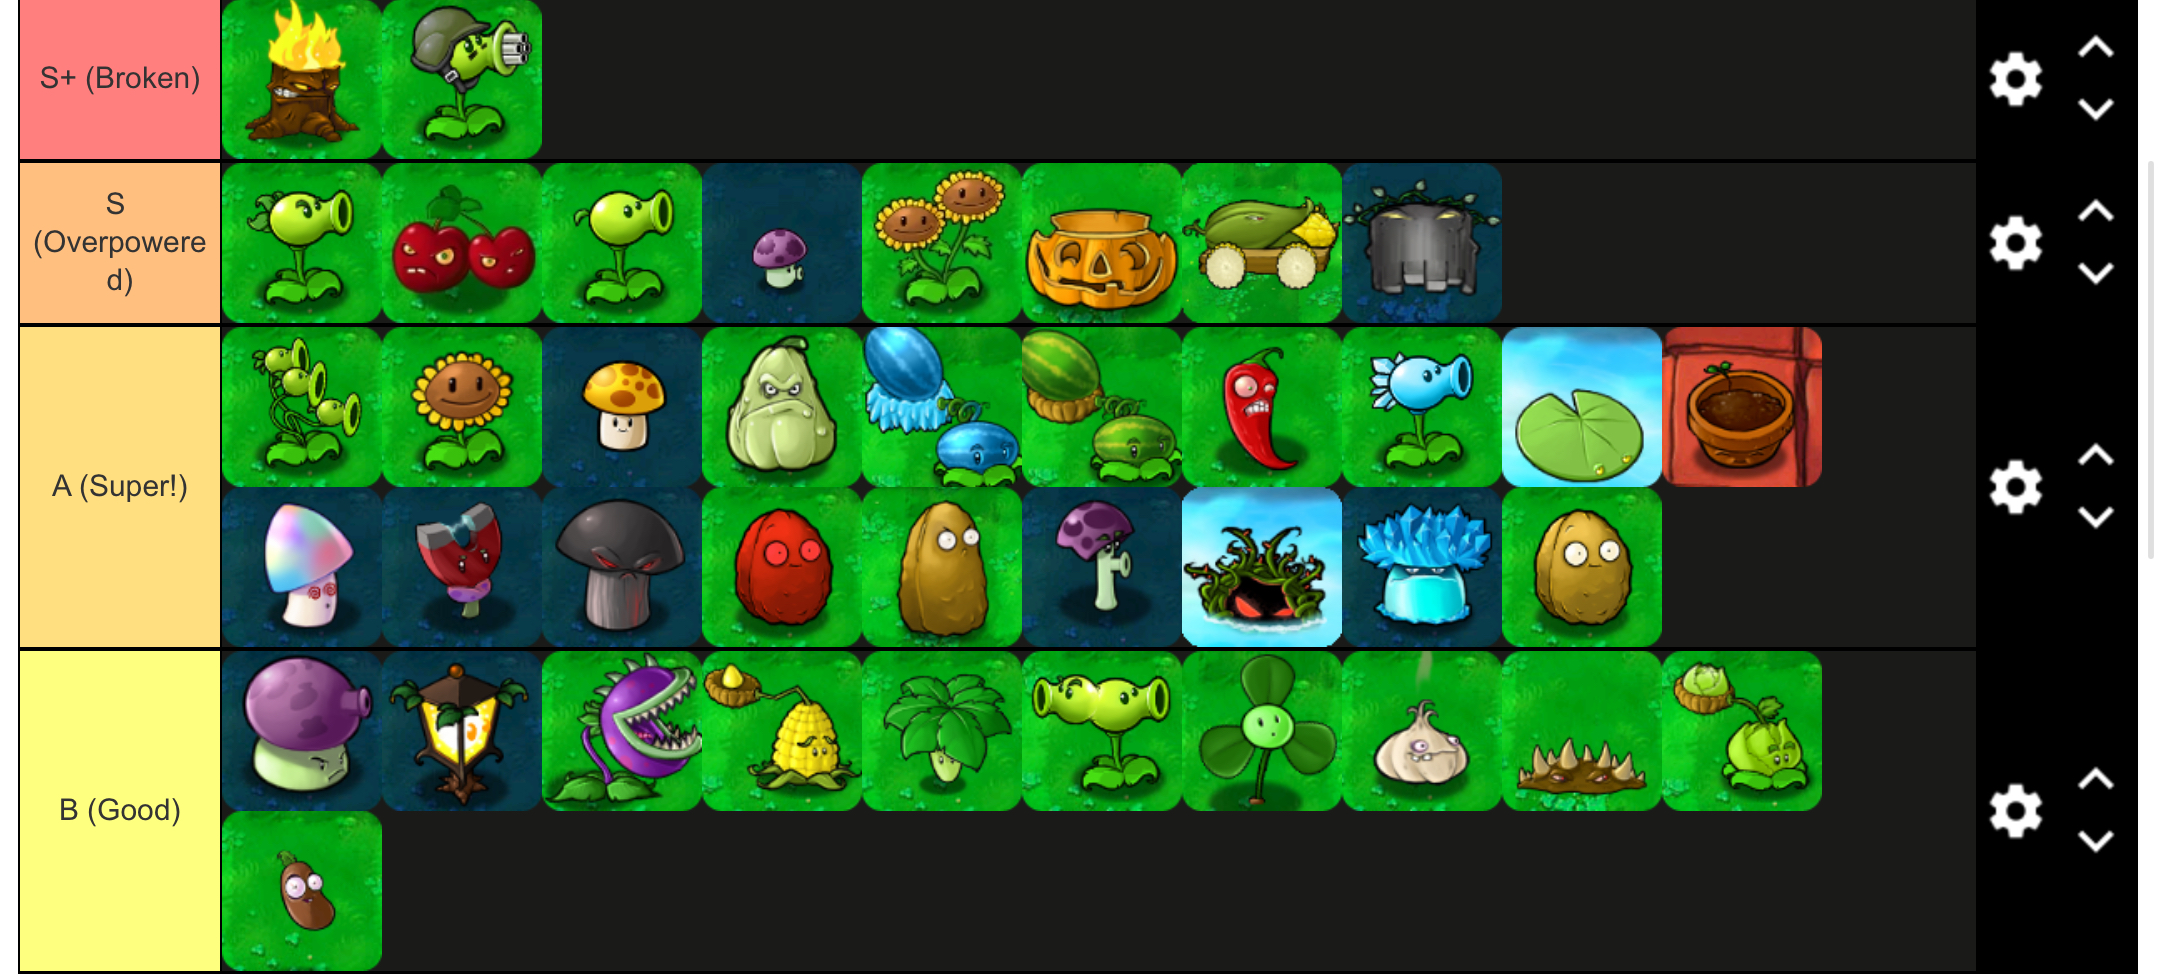 Plants Vs. Zombies TIER LIST - Ranking the Plants From Worst to